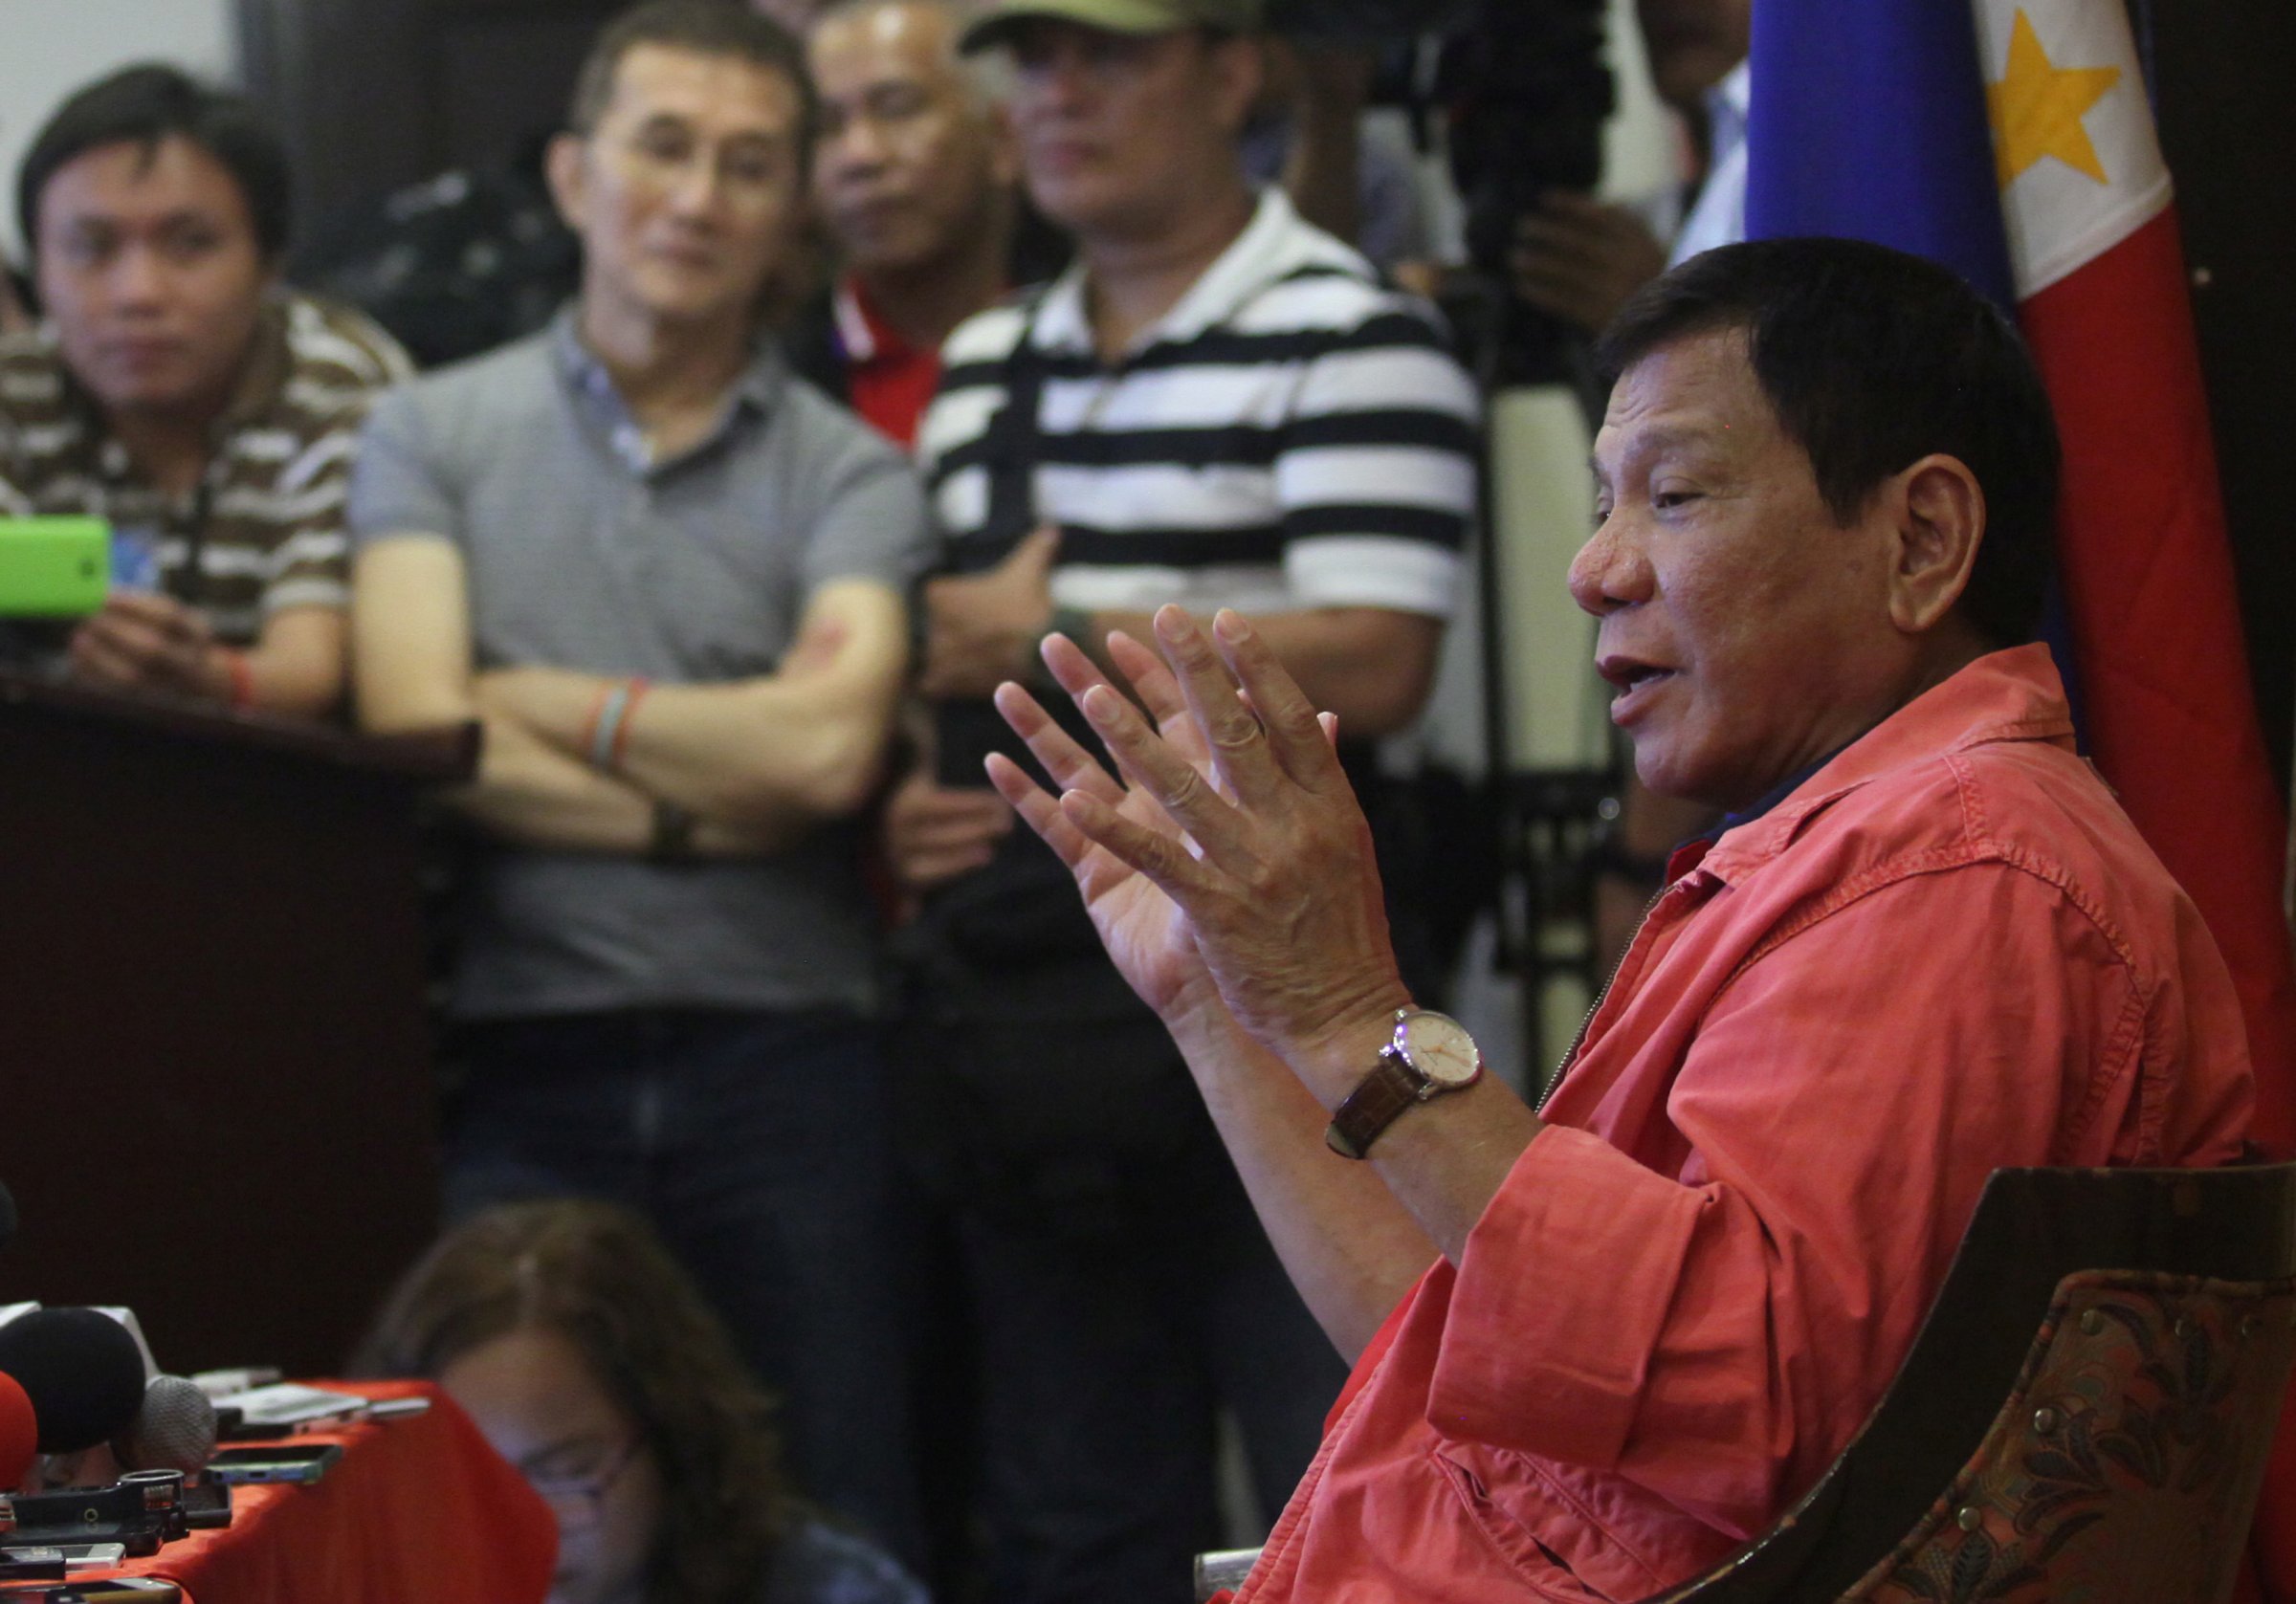 Philippine President-elect Rodrigo Duterte during a news conference at a hotel in Davao city, southern Philippines May 26, 2016.